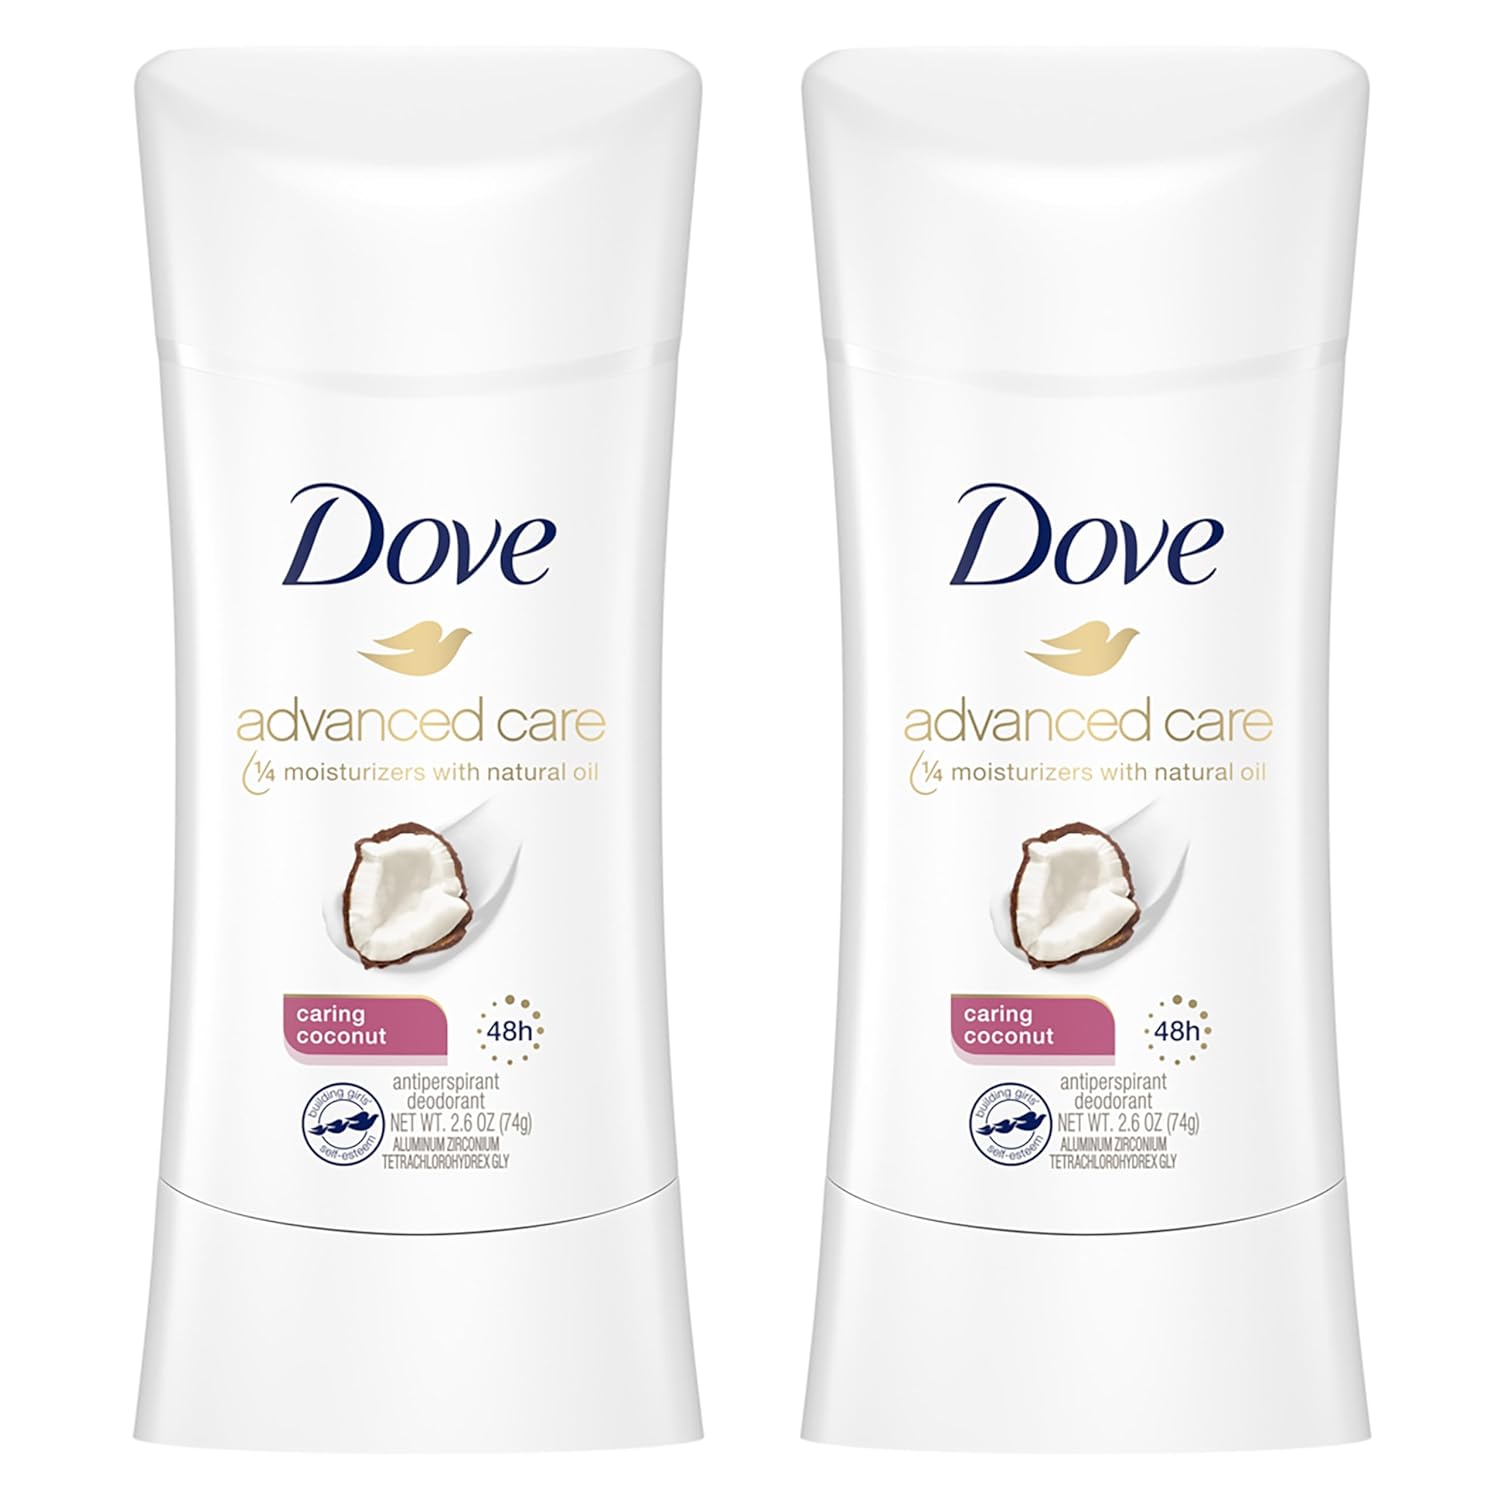 Dove Advanced Care Antiperspirant Caring Coconut, Deodorant Stick for Women, for 48 Hour Protection 